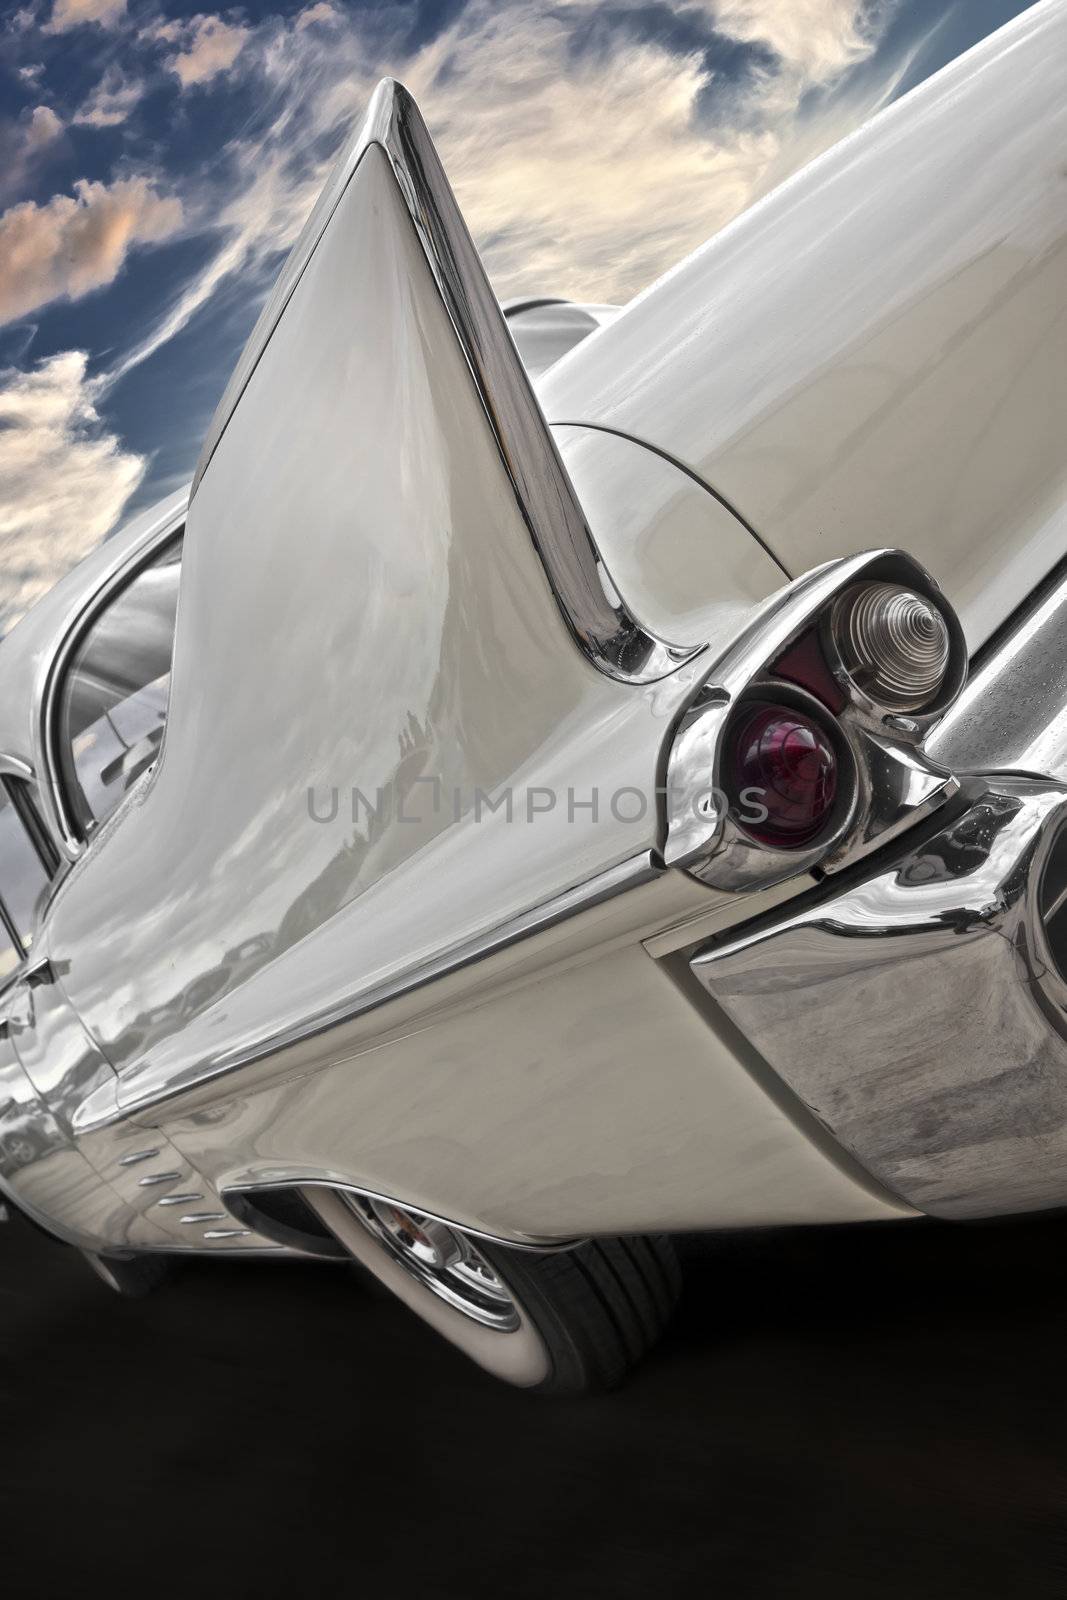 American Classic by PhotoWorks